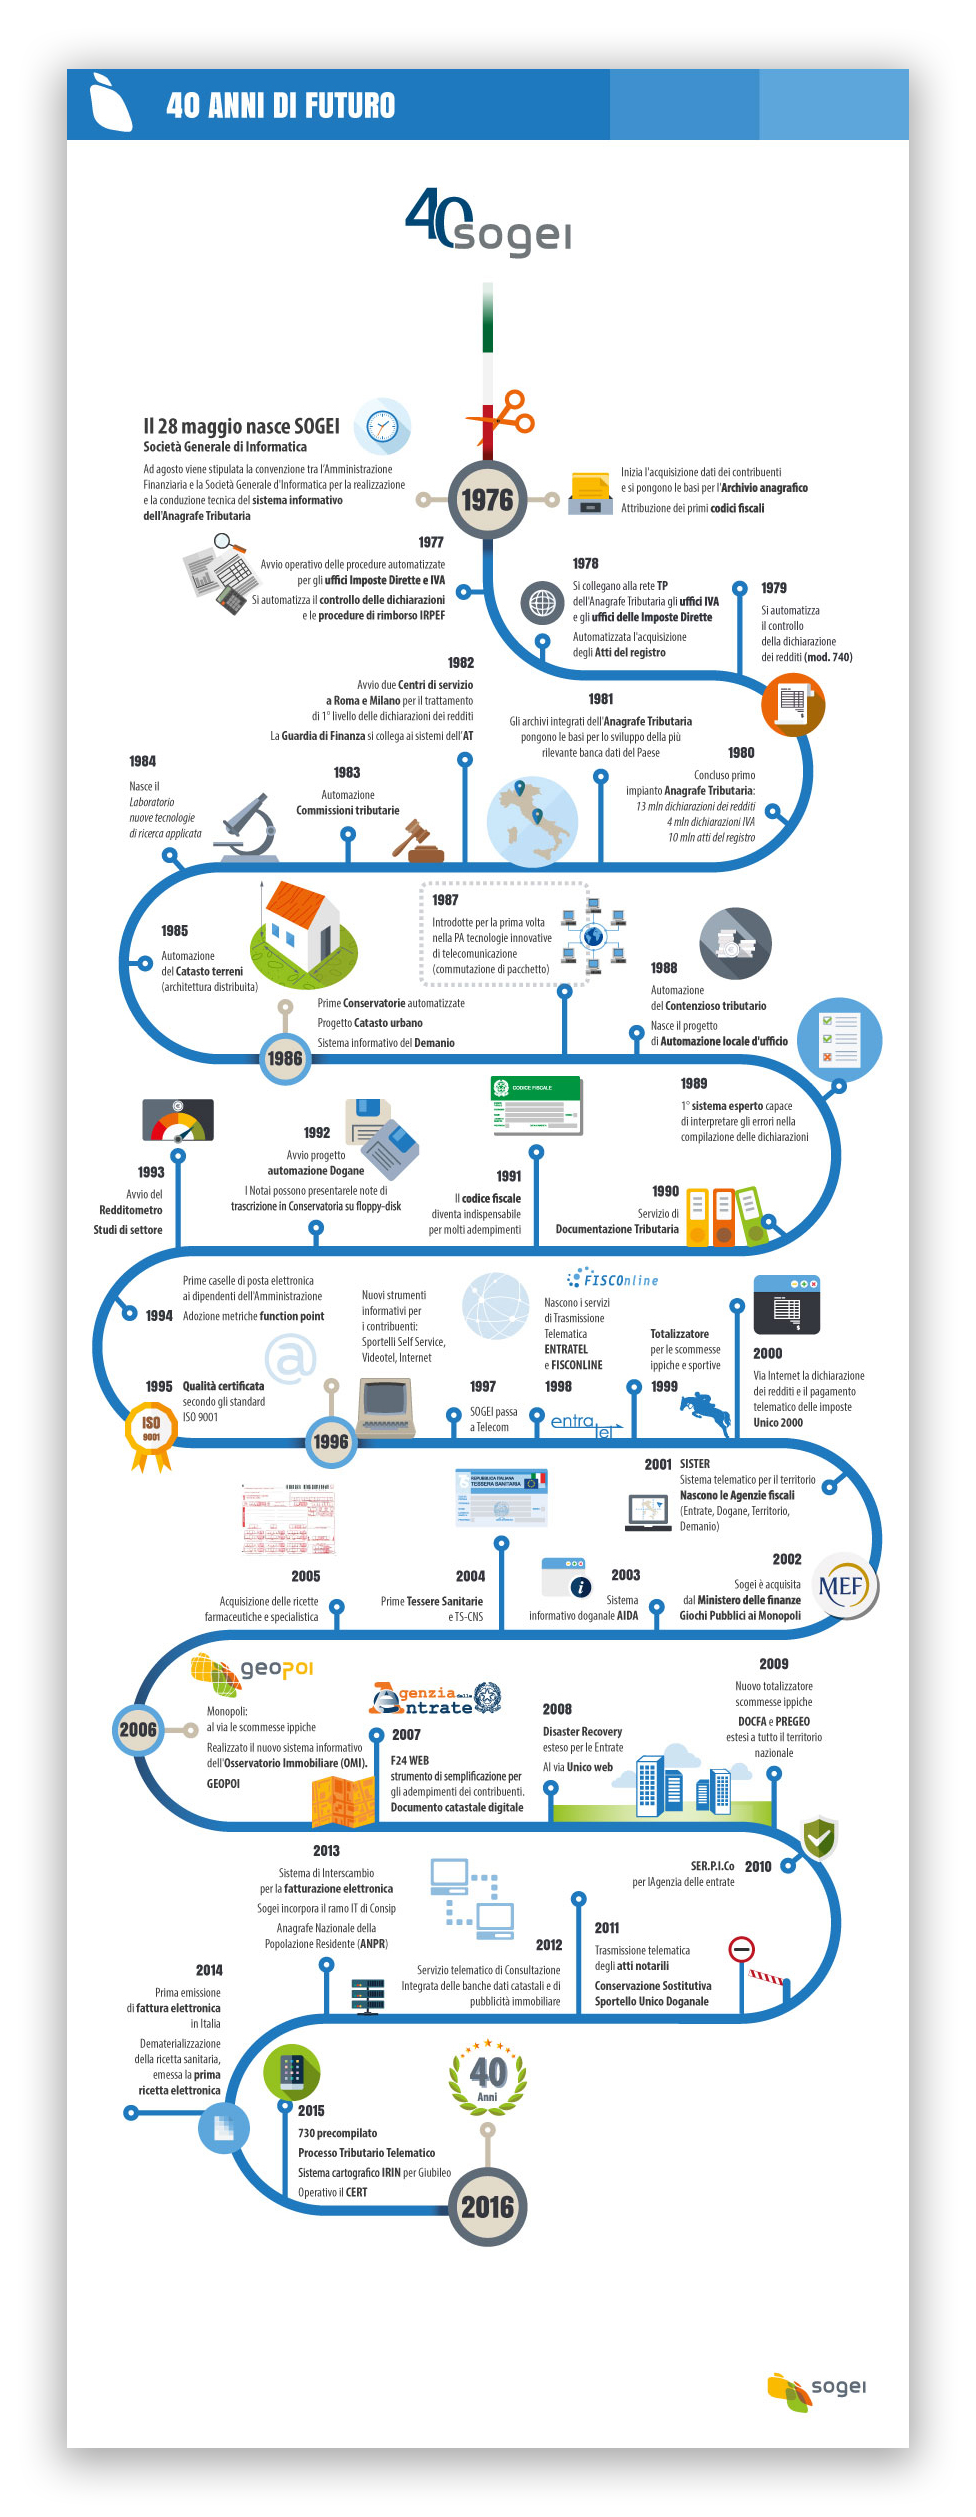 timeline infographic Technology future Italy sogei story Mef